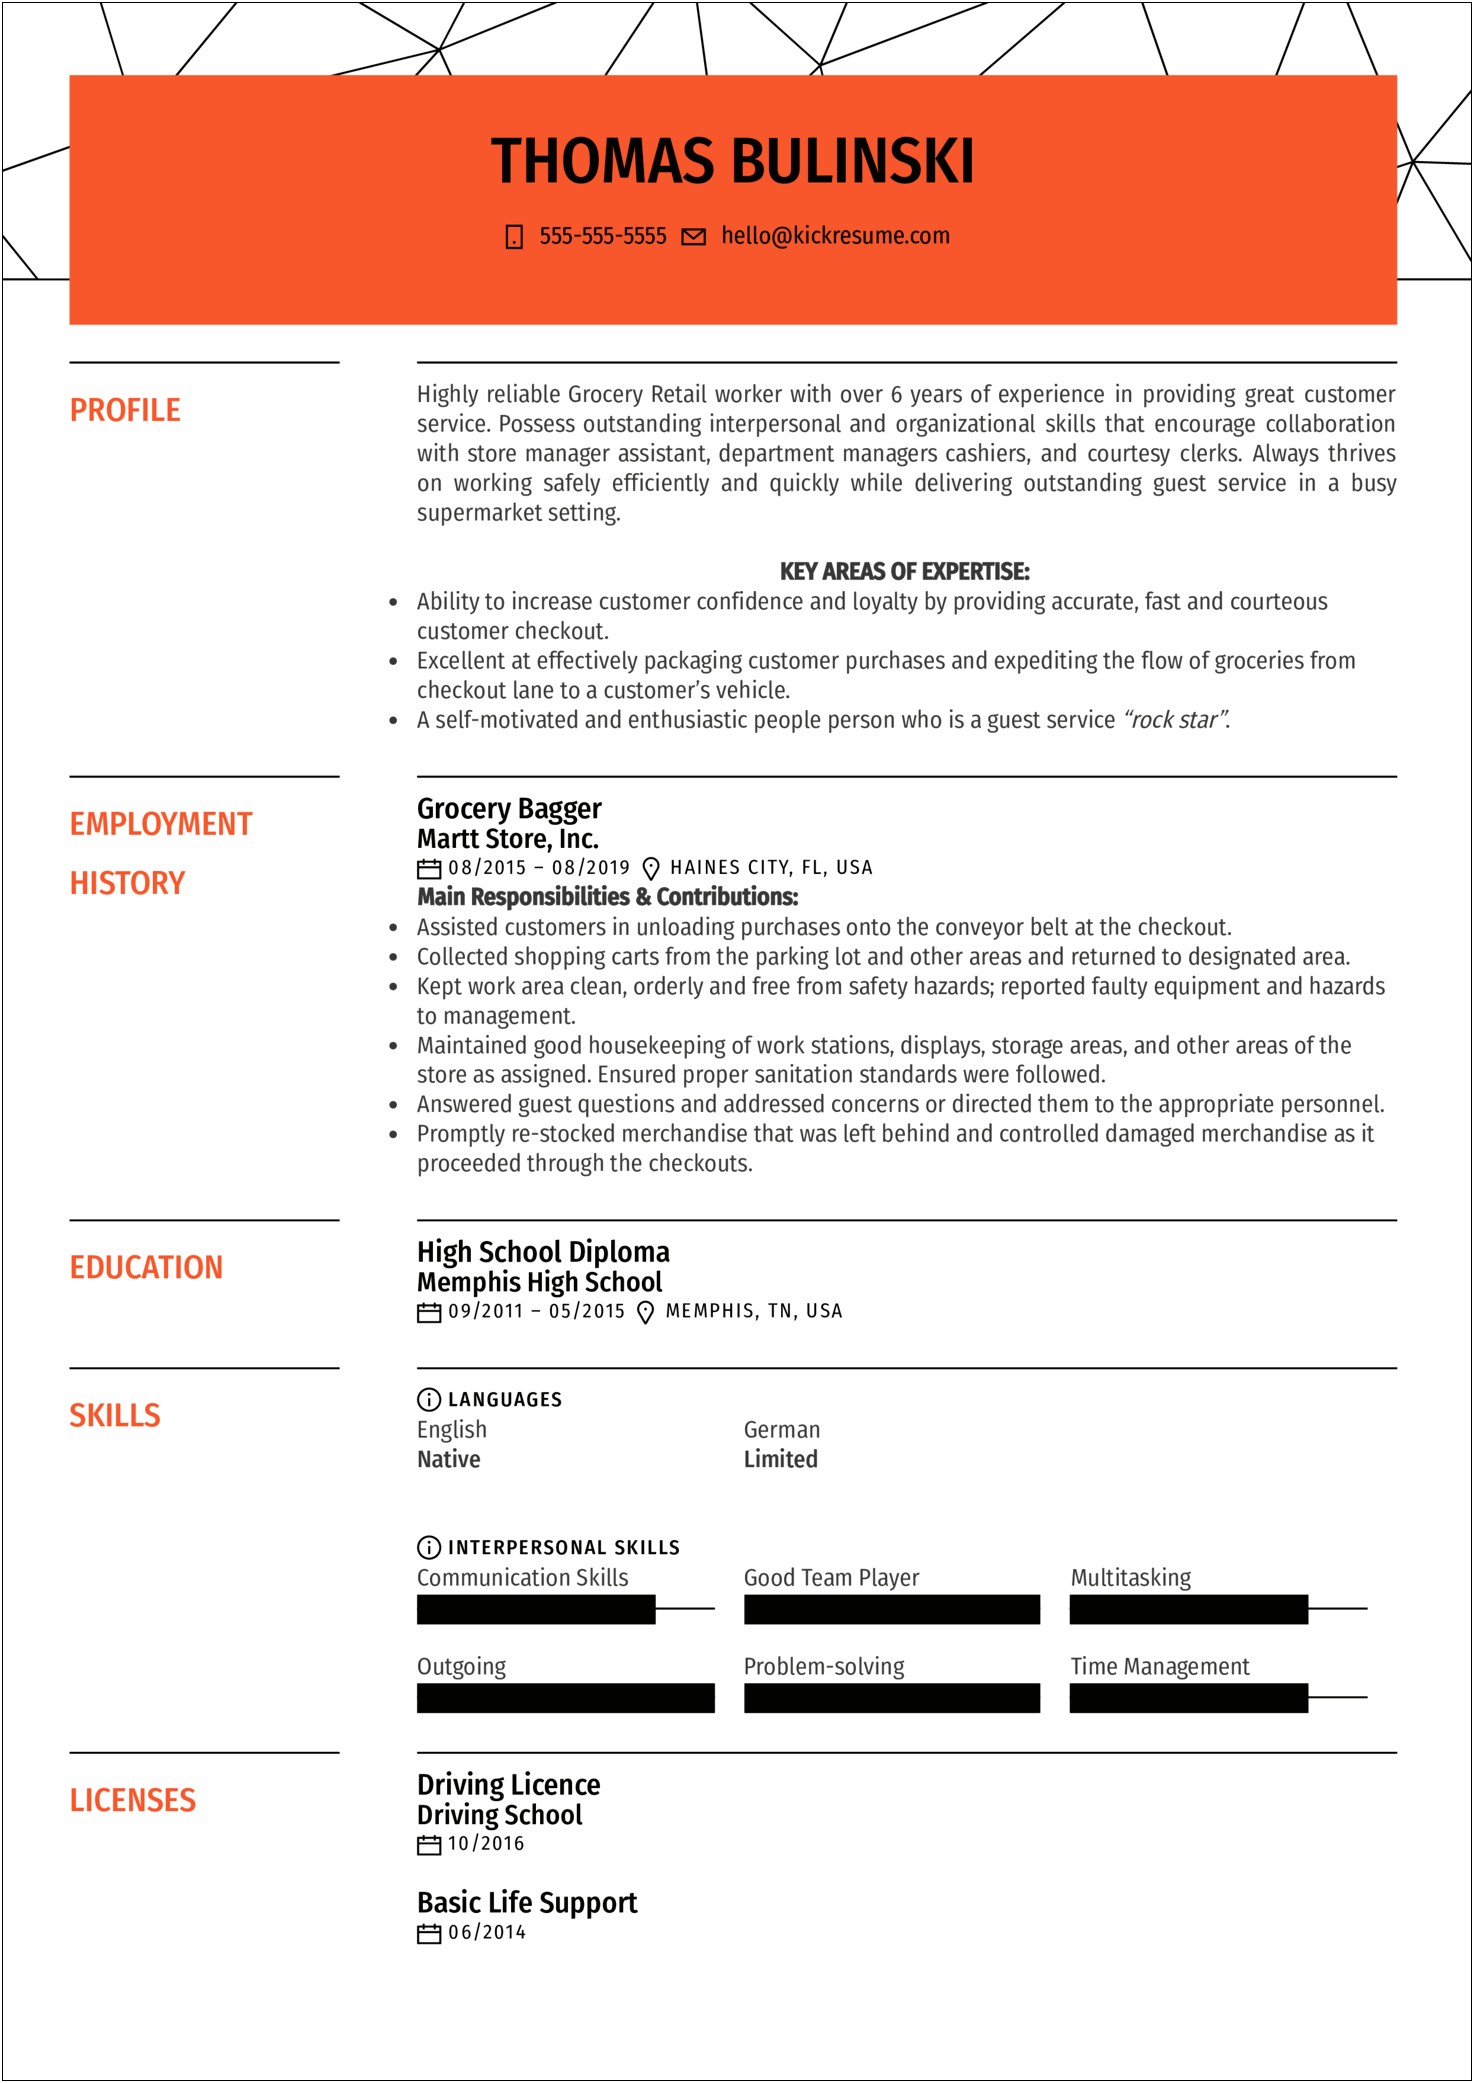 Working In A Grocery Store Resume